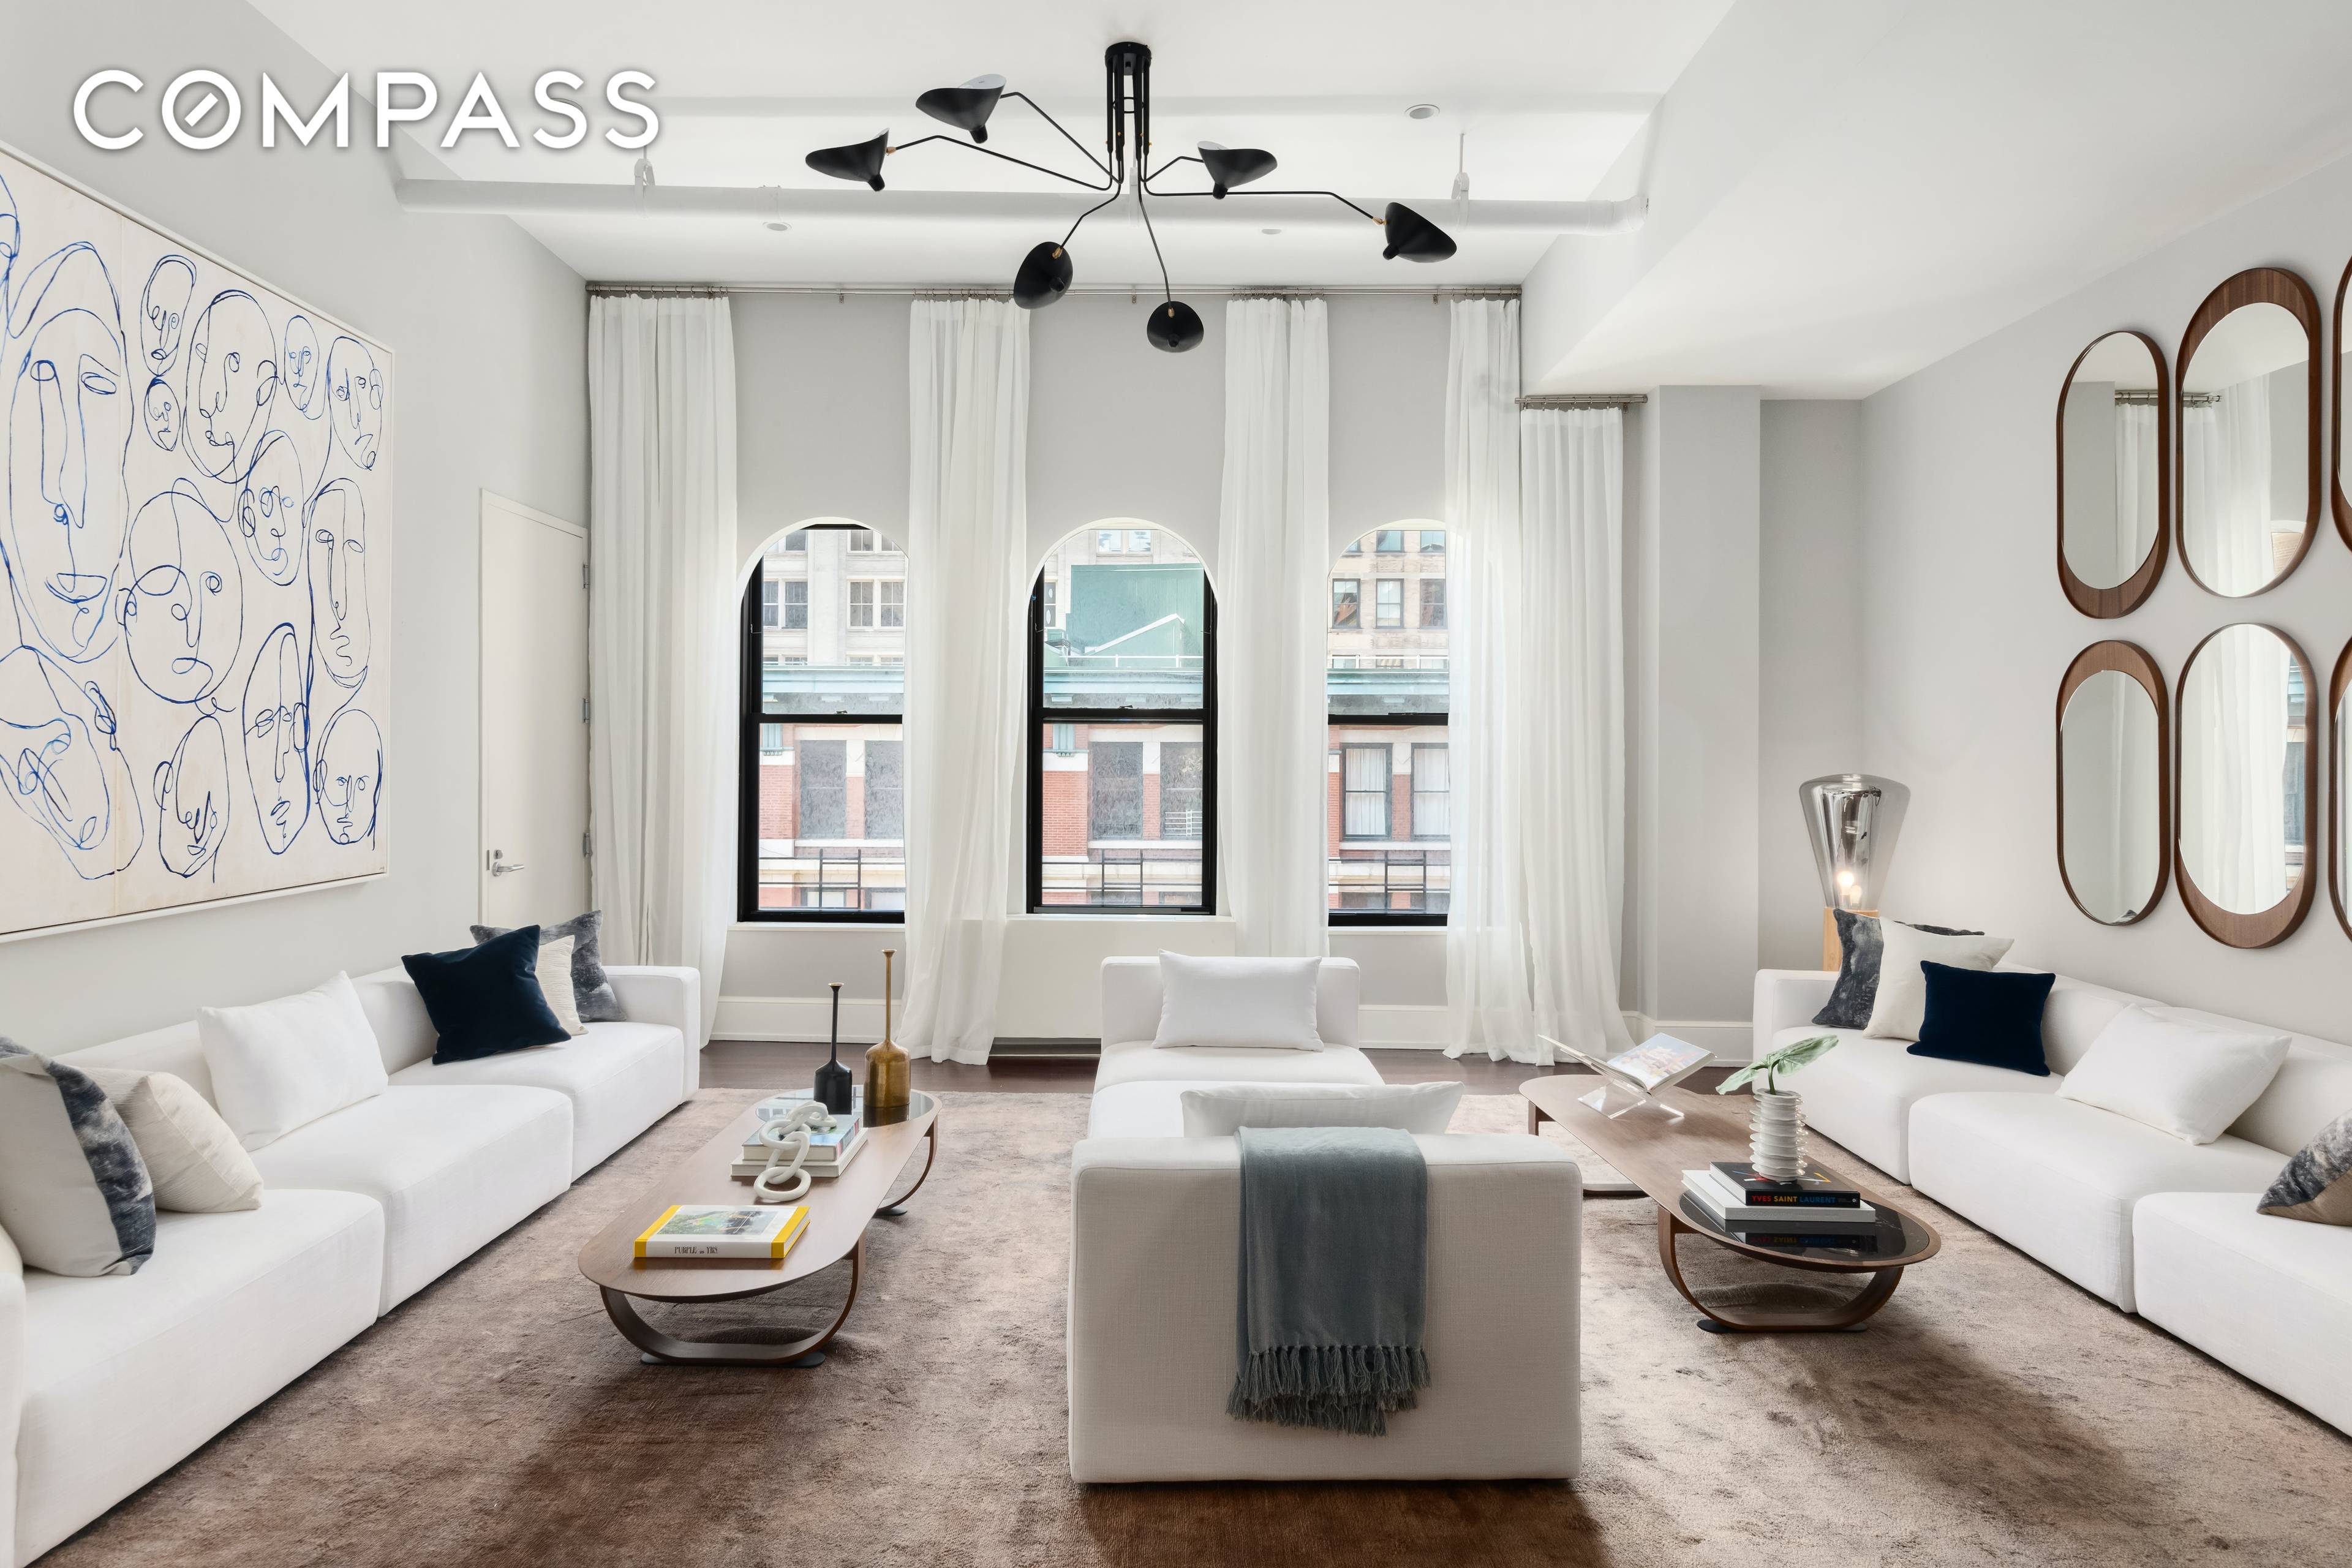 With apartments rarely for sale in the sought after, full service, prewar condominium 285 Lafayette Street, this expansive corner loft overlooks Lafayette St.